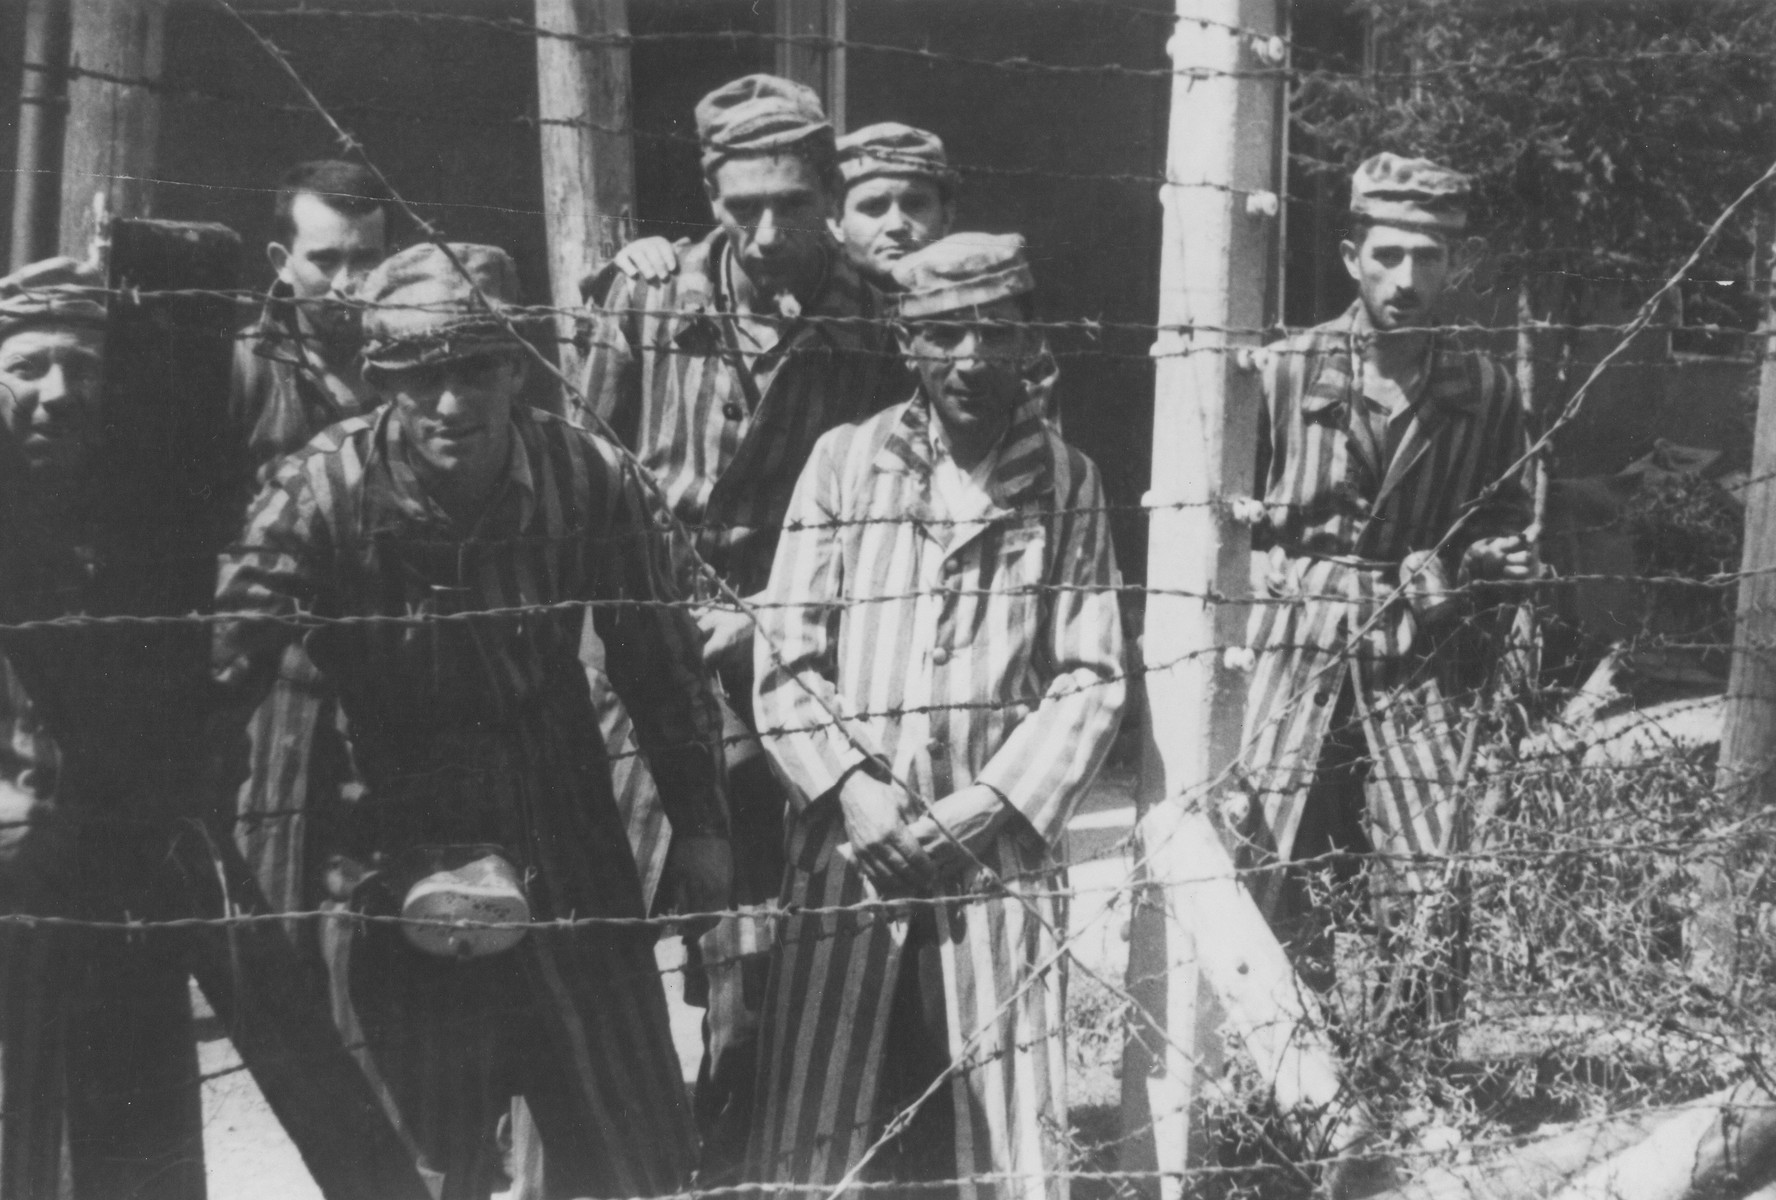 Newly liberated prisoners stand by the barbed wire fence in either Mauthausen or Gunskirchen.

Pictured in the center is Tibor Weinberger.